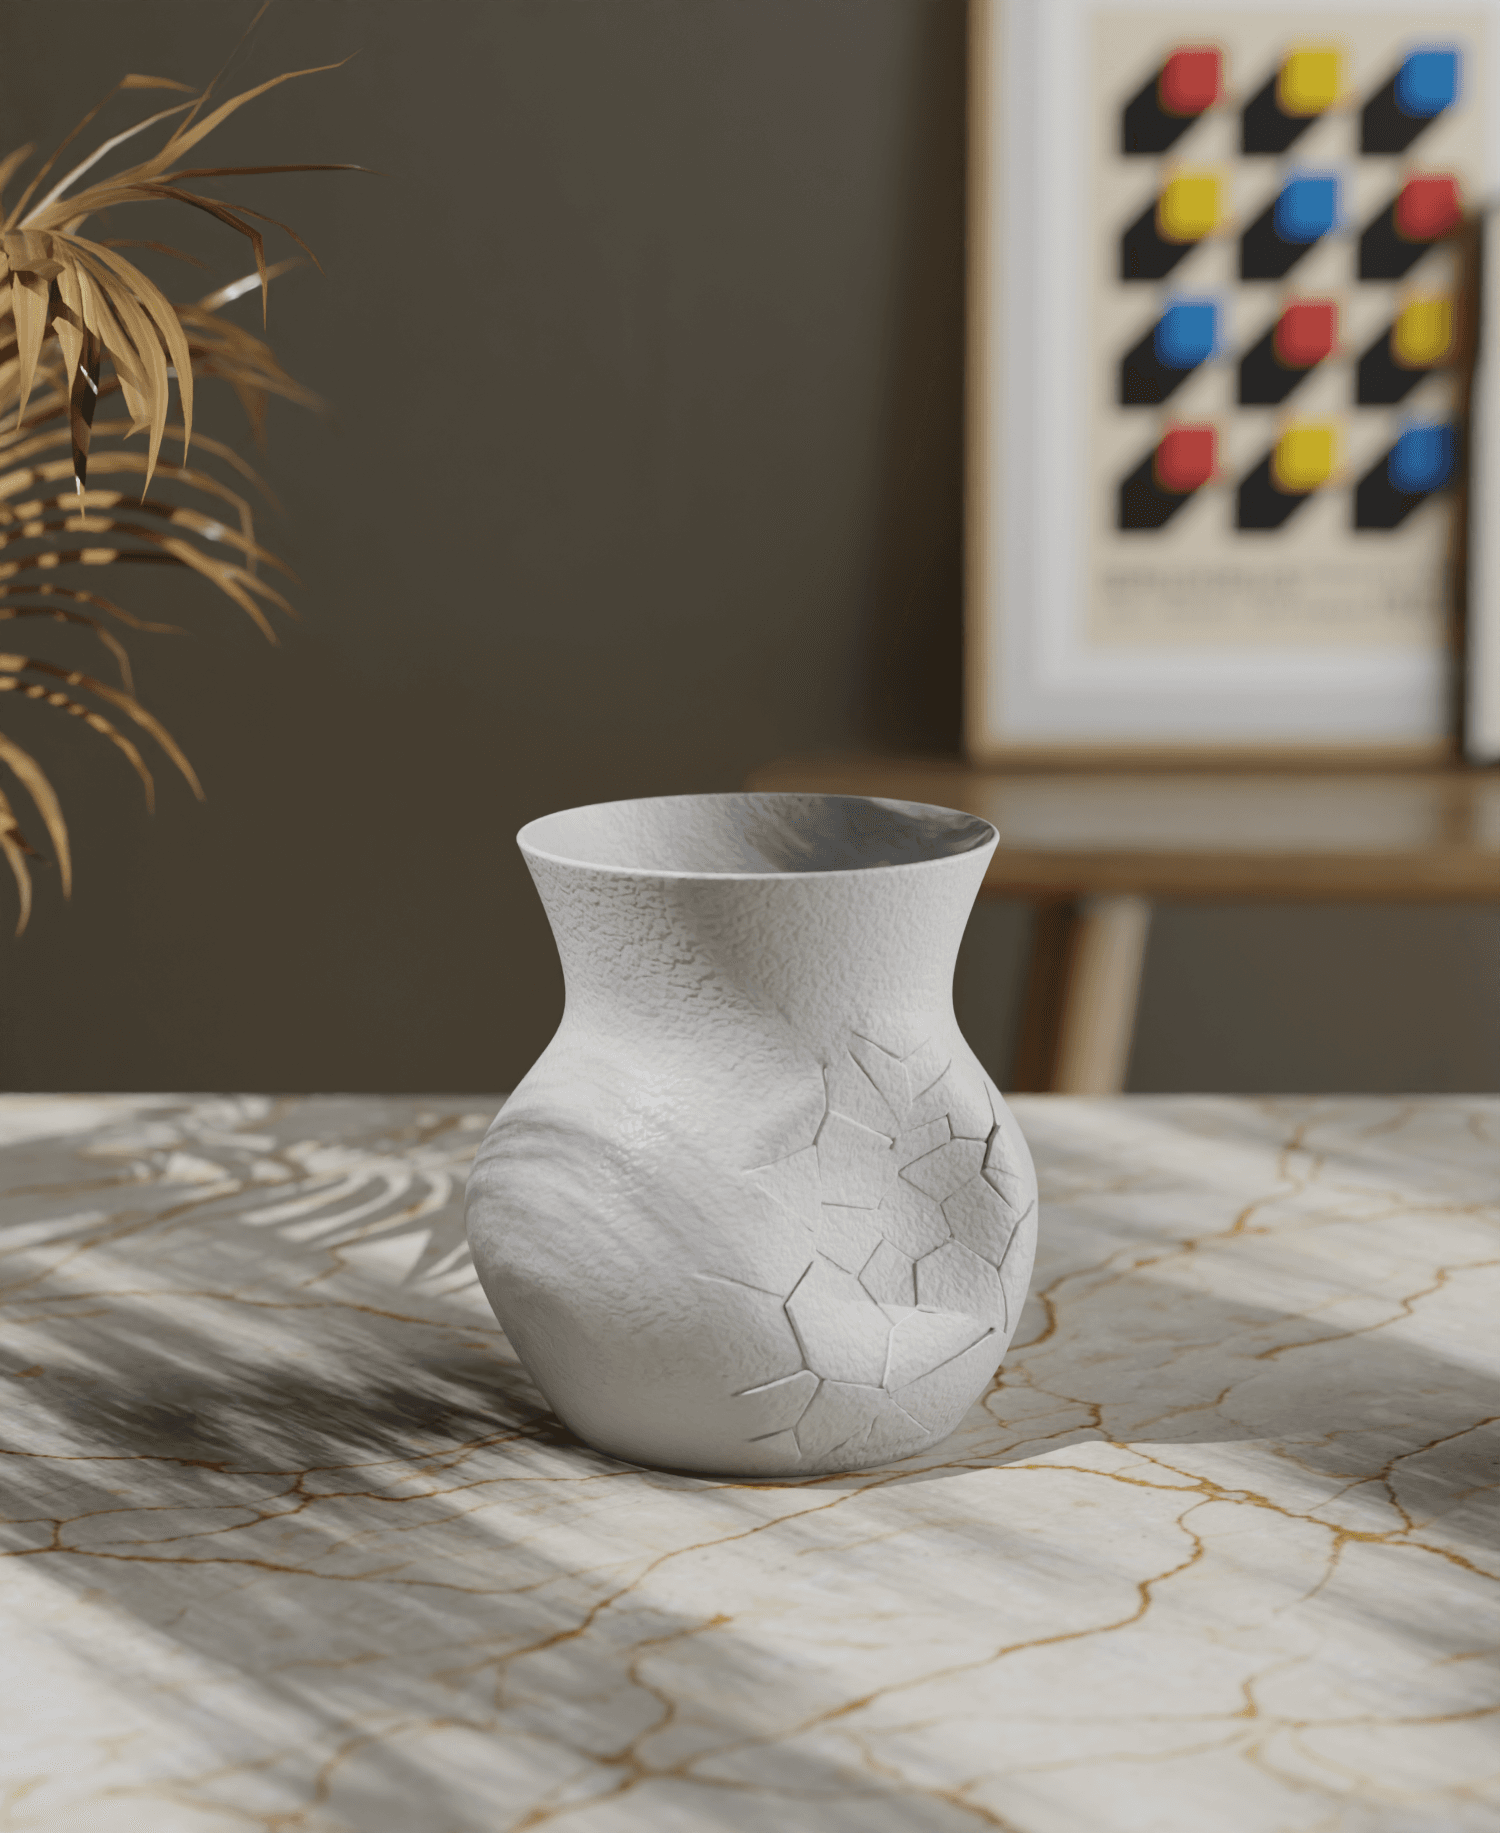 Shattered Pottery: An Artful Expression of Resilience 3d model